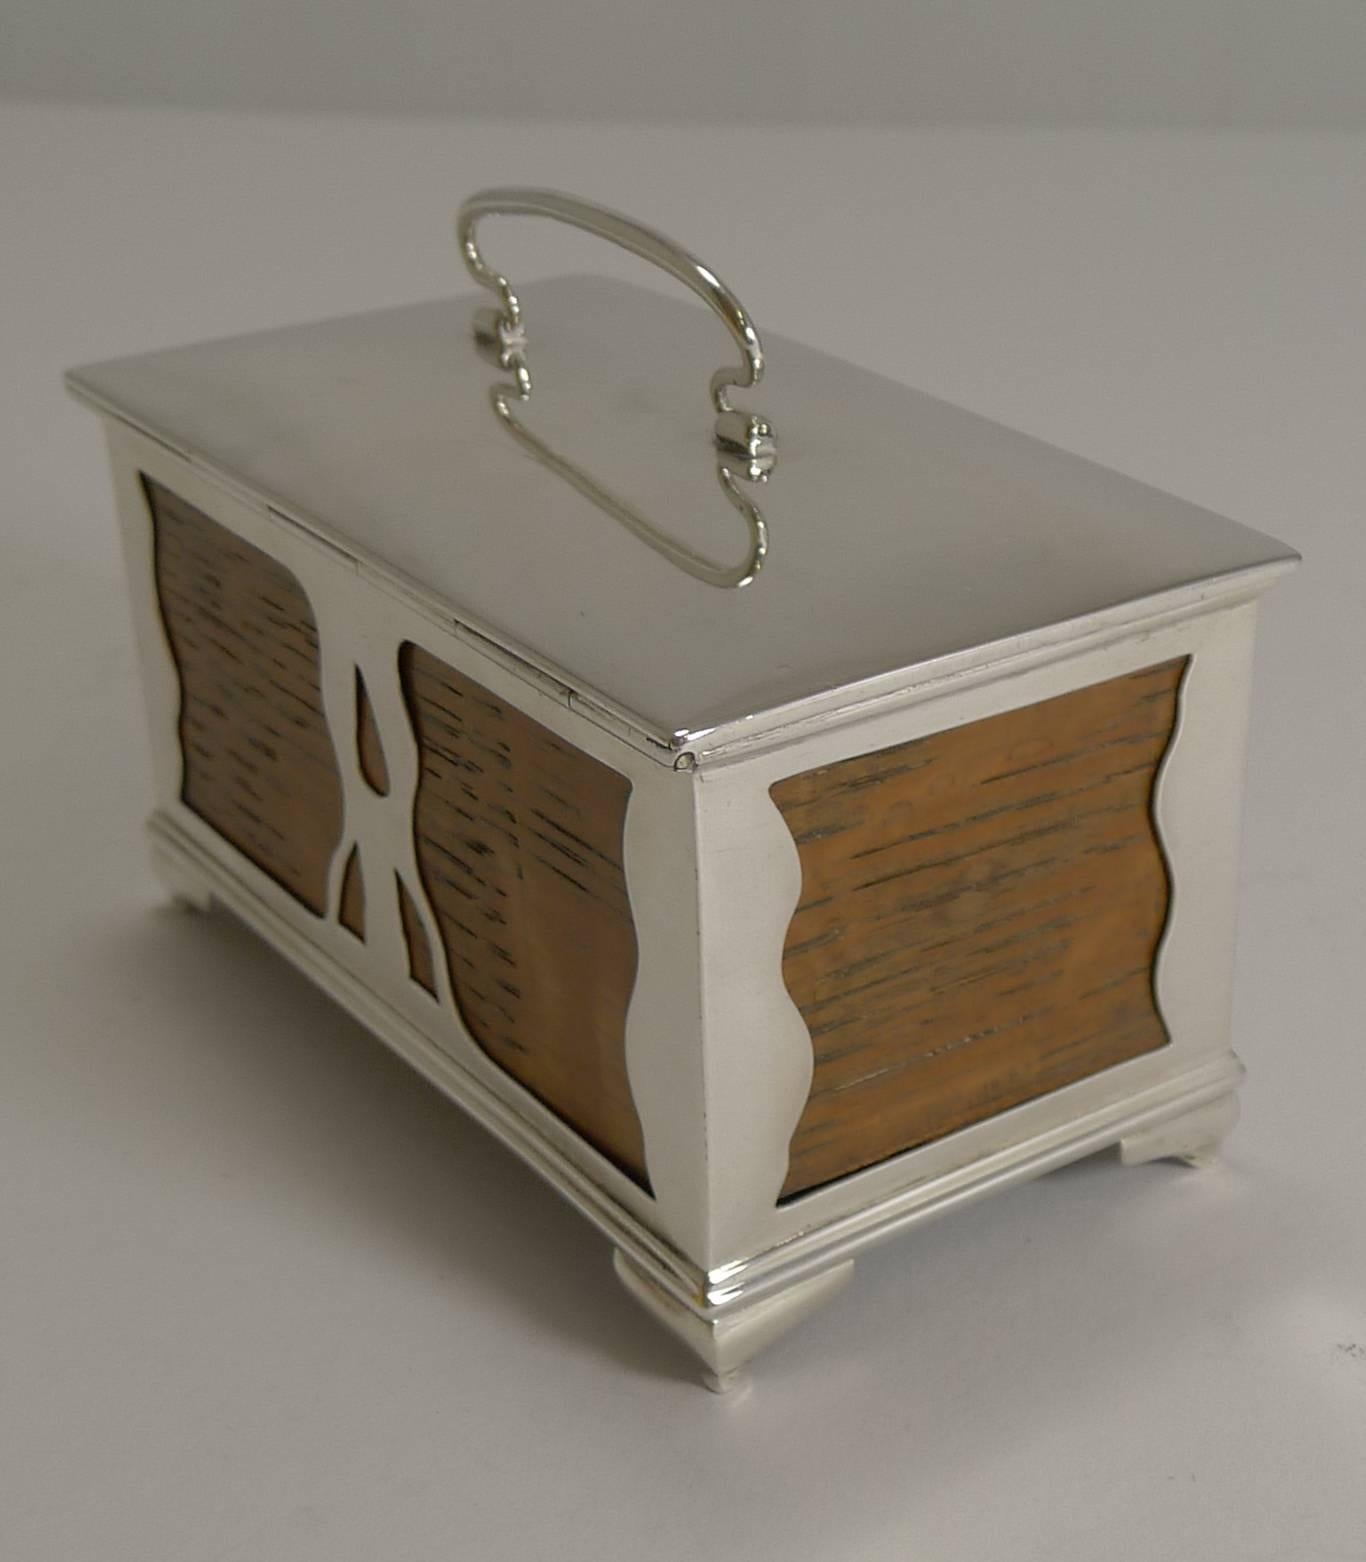 English Art Nouveau Oak and Sterling Silver Trinket Box by Deakin and Francis 1